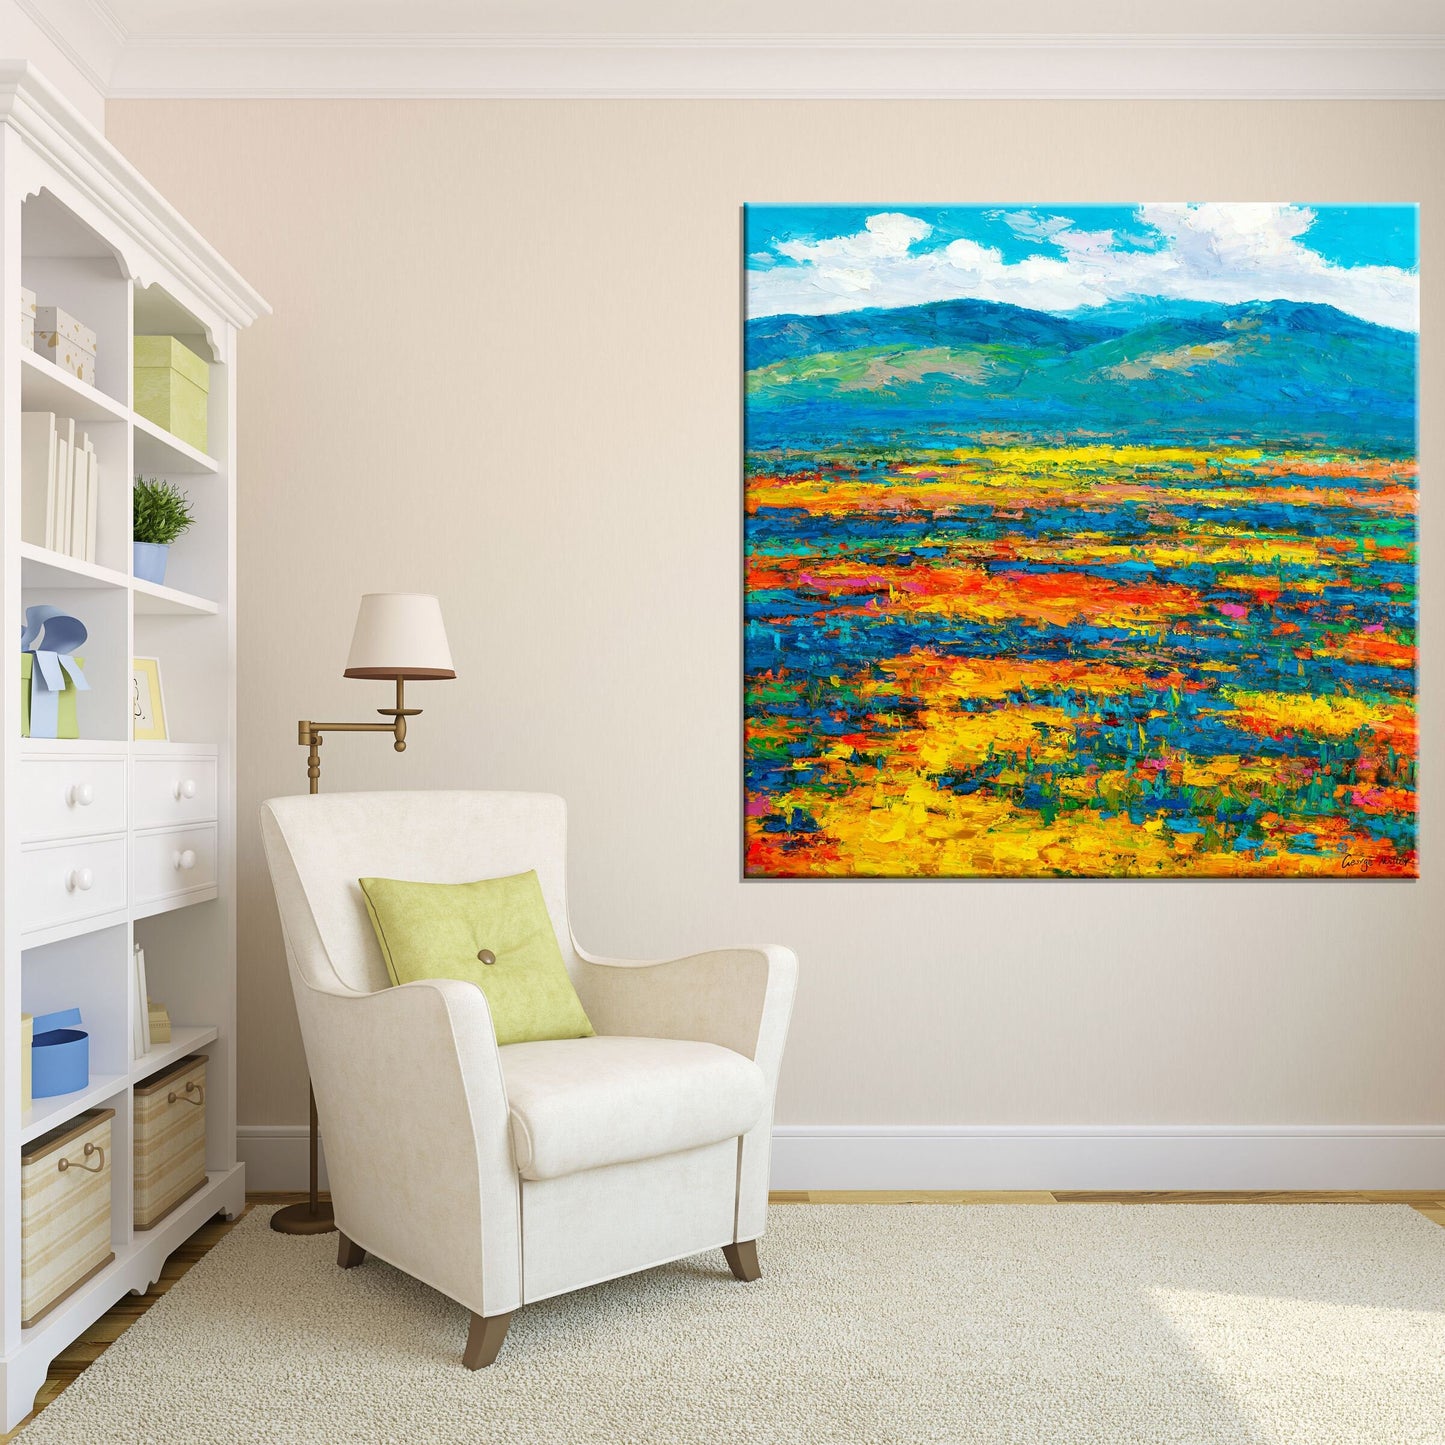 Original Oil Painting, Spring Moutain Fields with Flowers, Canvas Wall Decor, Rustic Living Room Decor, Original Landscape Painting, Art